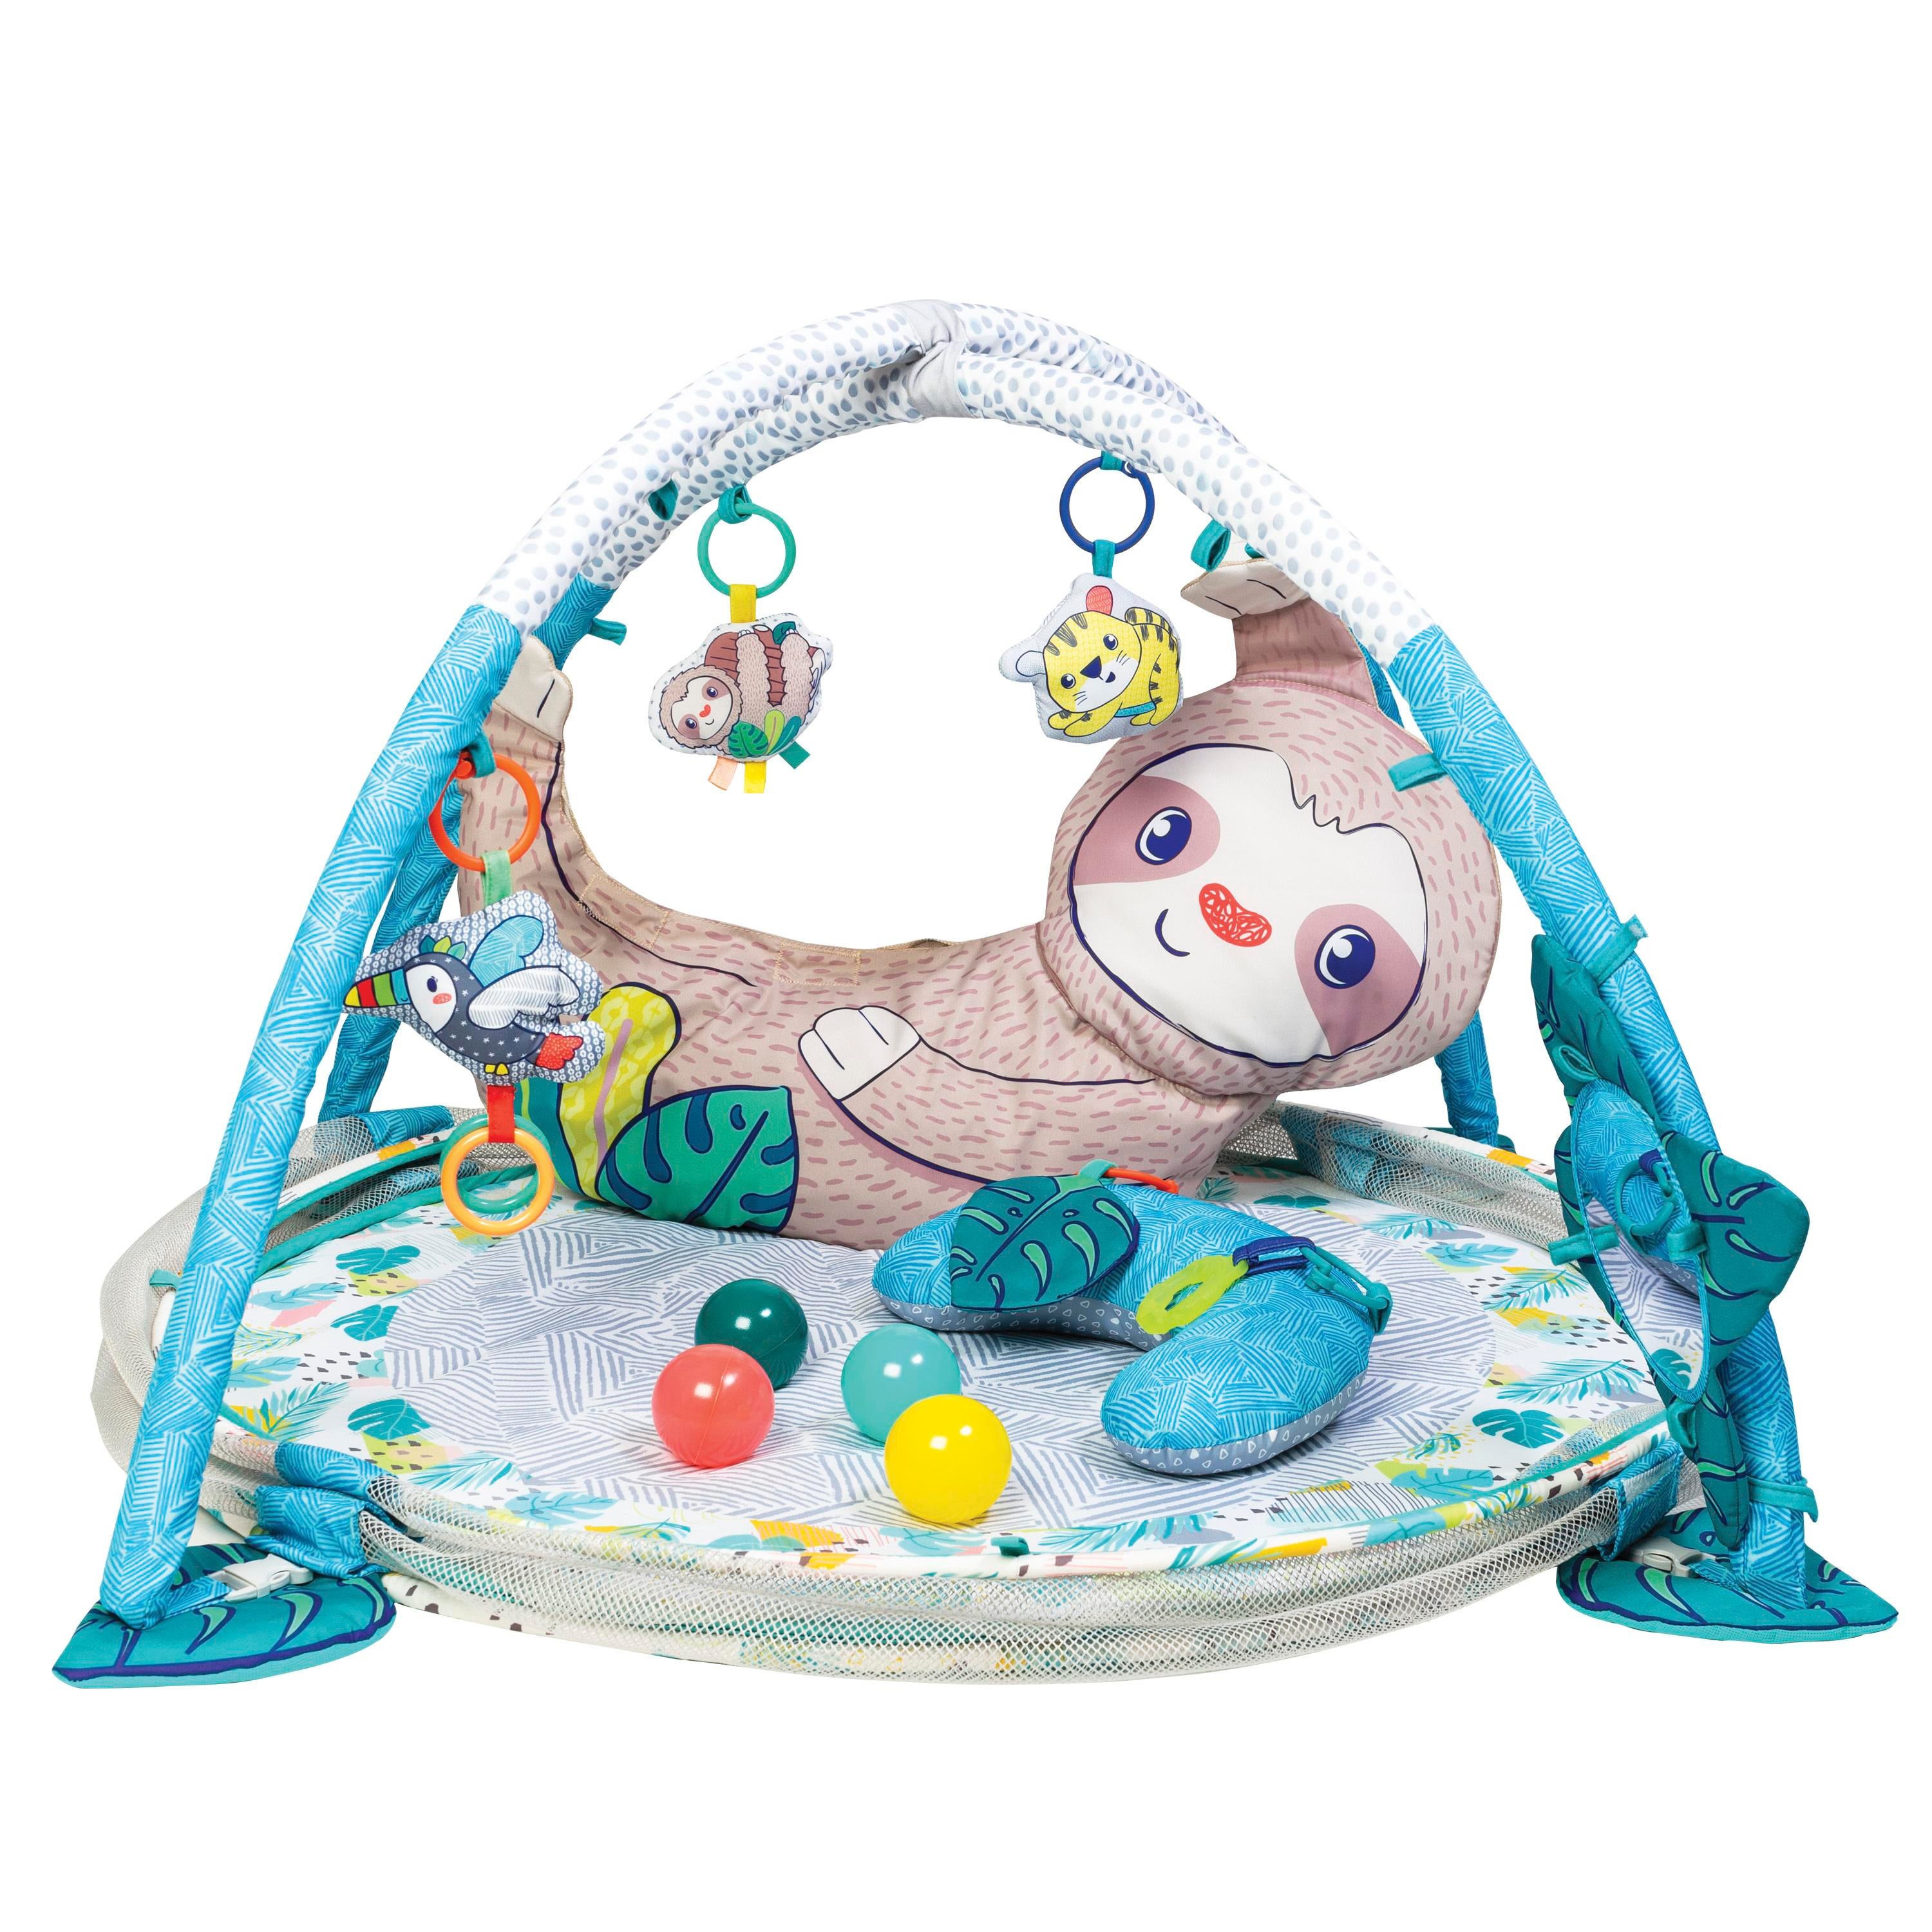 4-In-1 Jumbo Activity Gym & Ball Pit Sloth